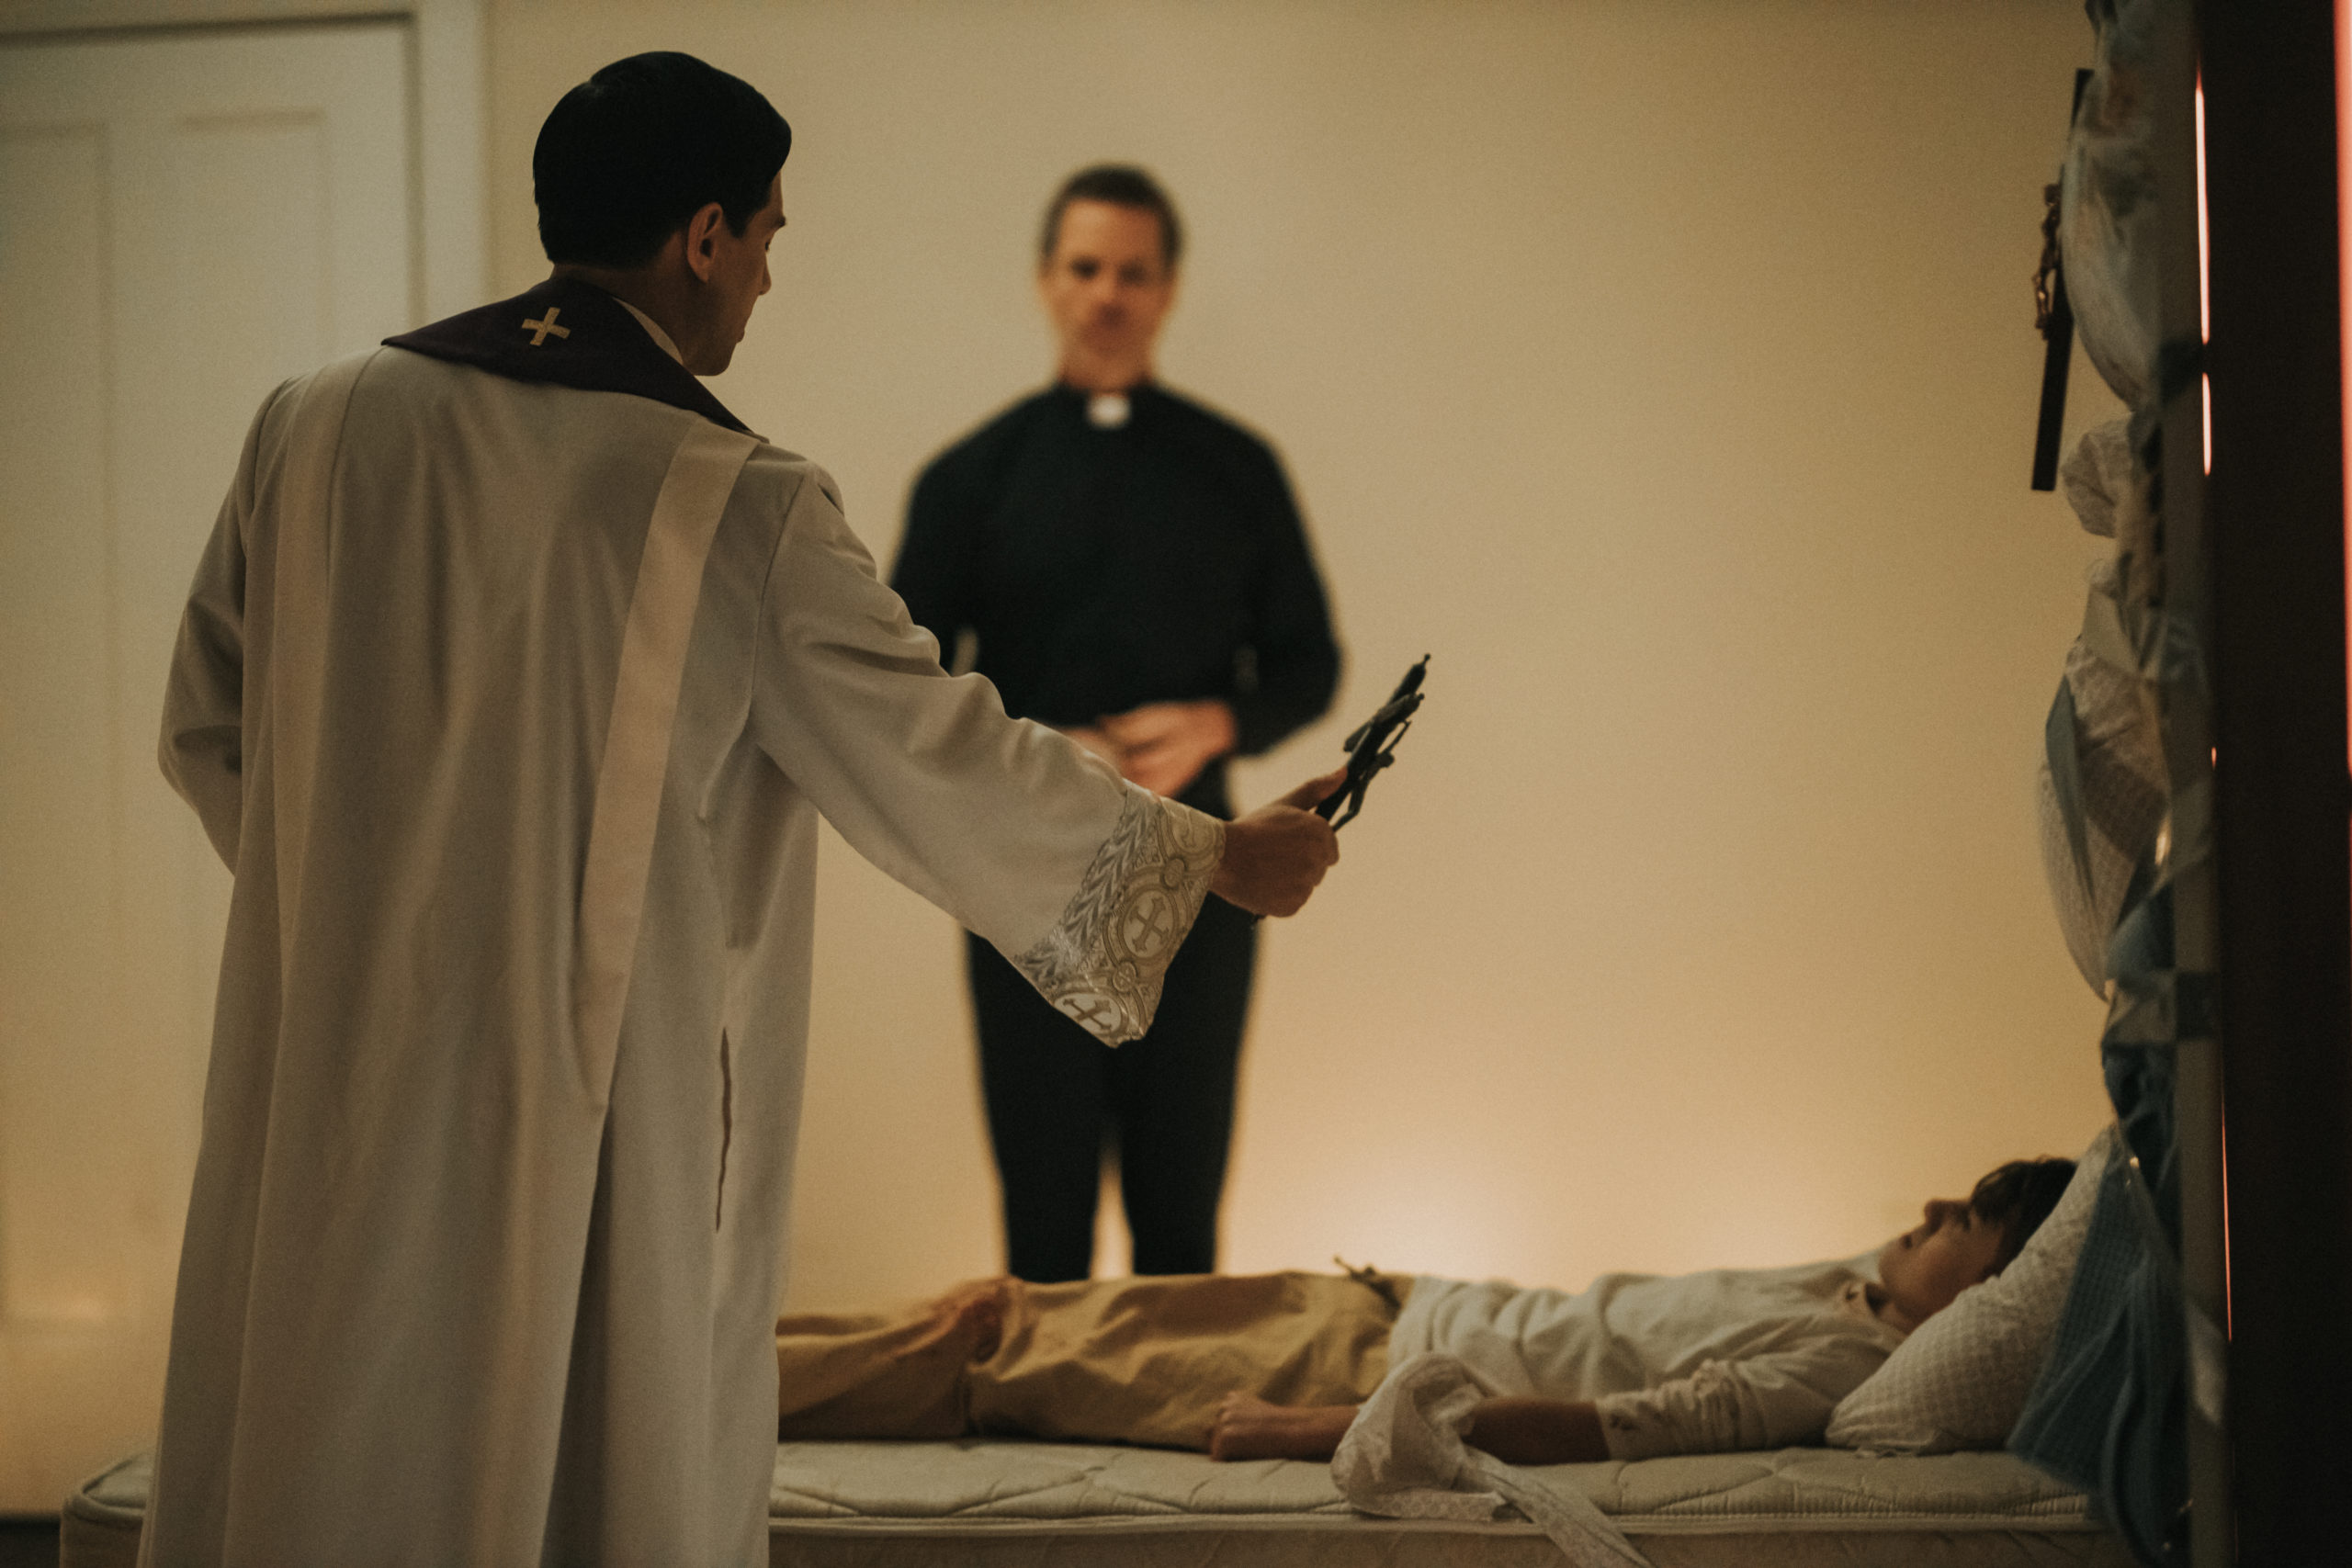 Justin P. Lange On Bringing a Different Exorcism Film with The Seventh Day [Exclusive Interview]